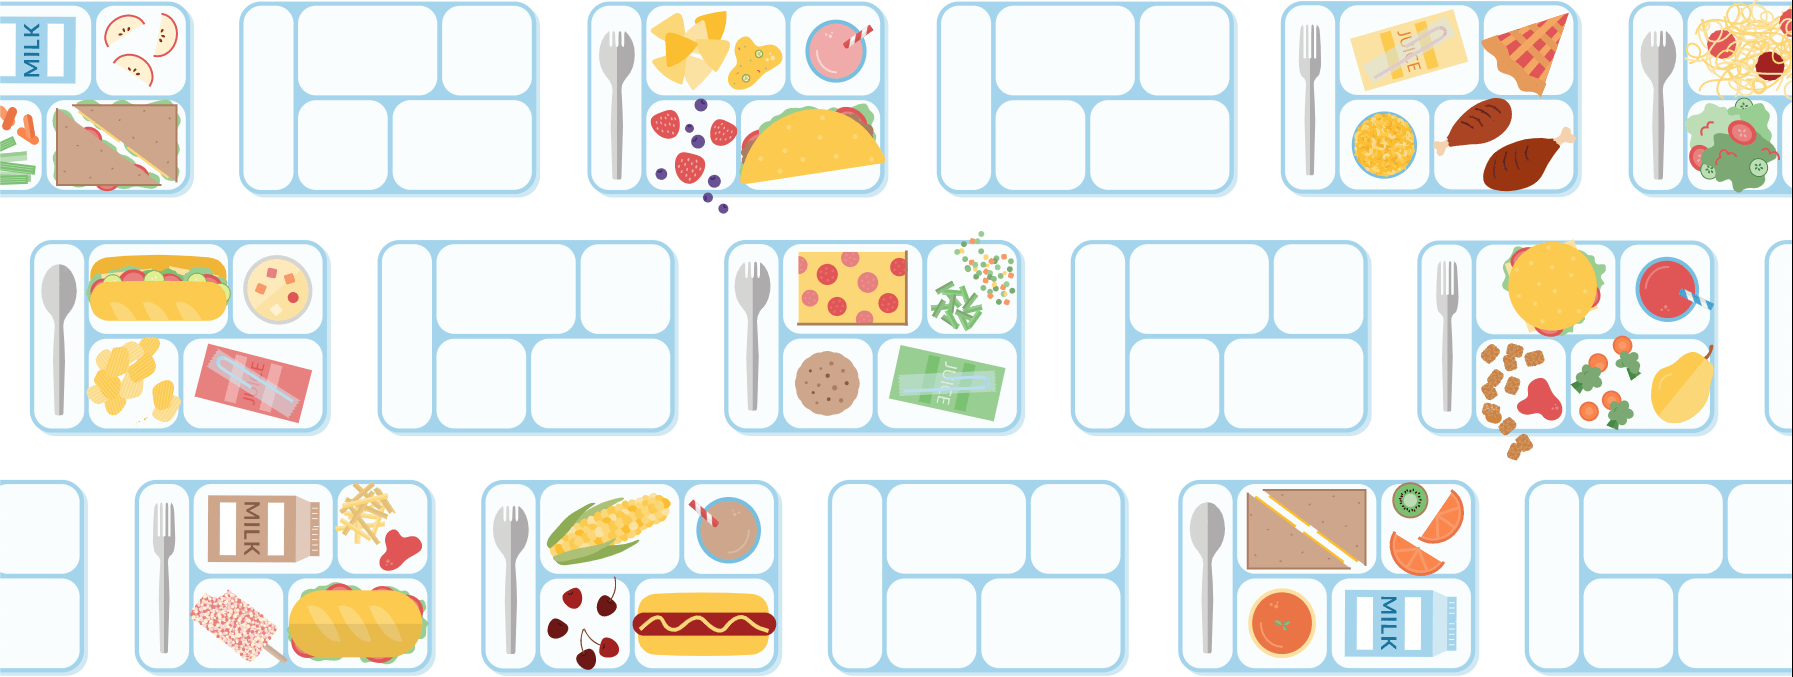 Illustrated student lunches and trays